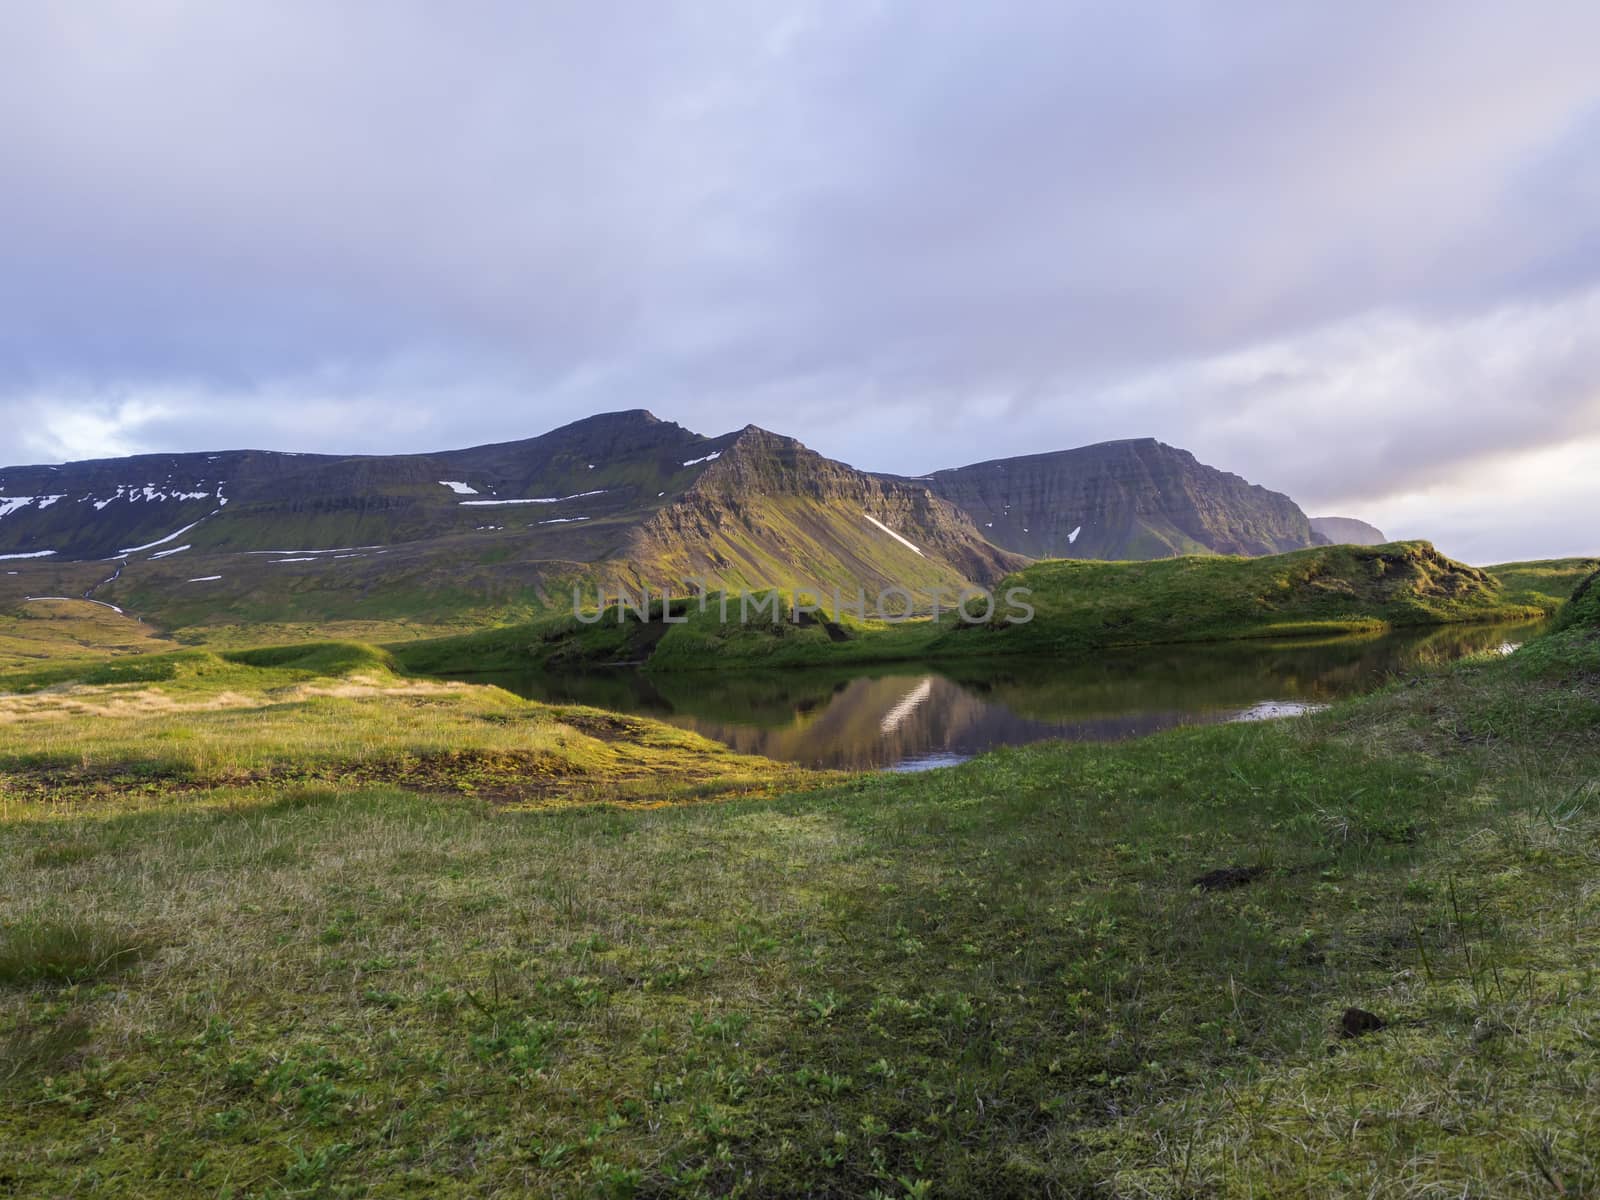 Northern landscape with green grass mossed creek banks in Hornstrandir Iceland, snow patched hills and cliffs, cloudy sky background, golden hour light, copy space